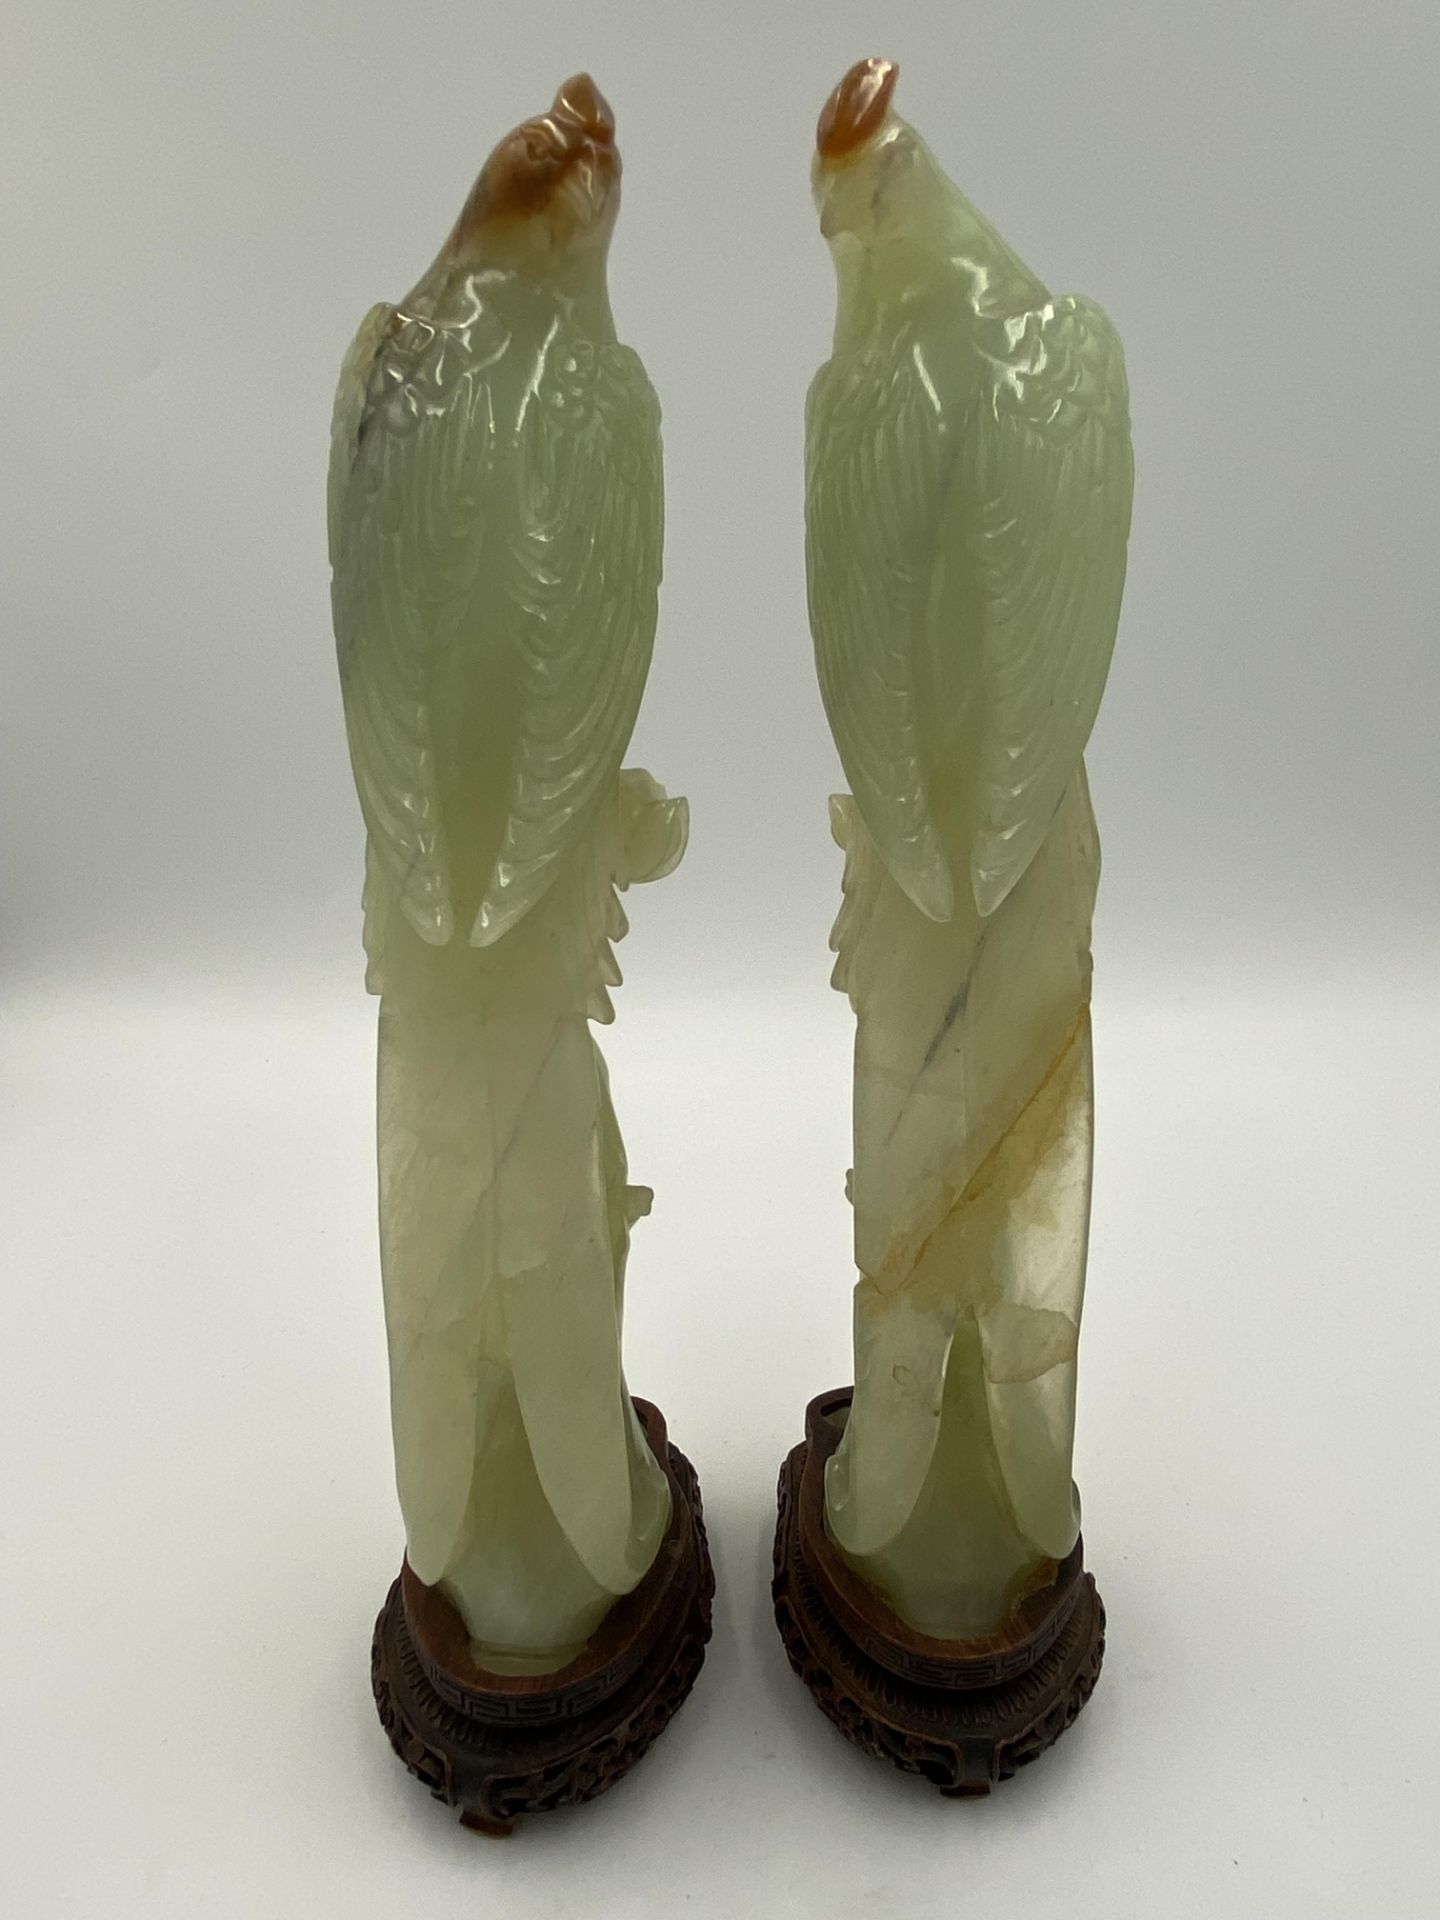 Pair of early 20th century chinese carved jade birds resting on tree stumps - Image 11 of 12